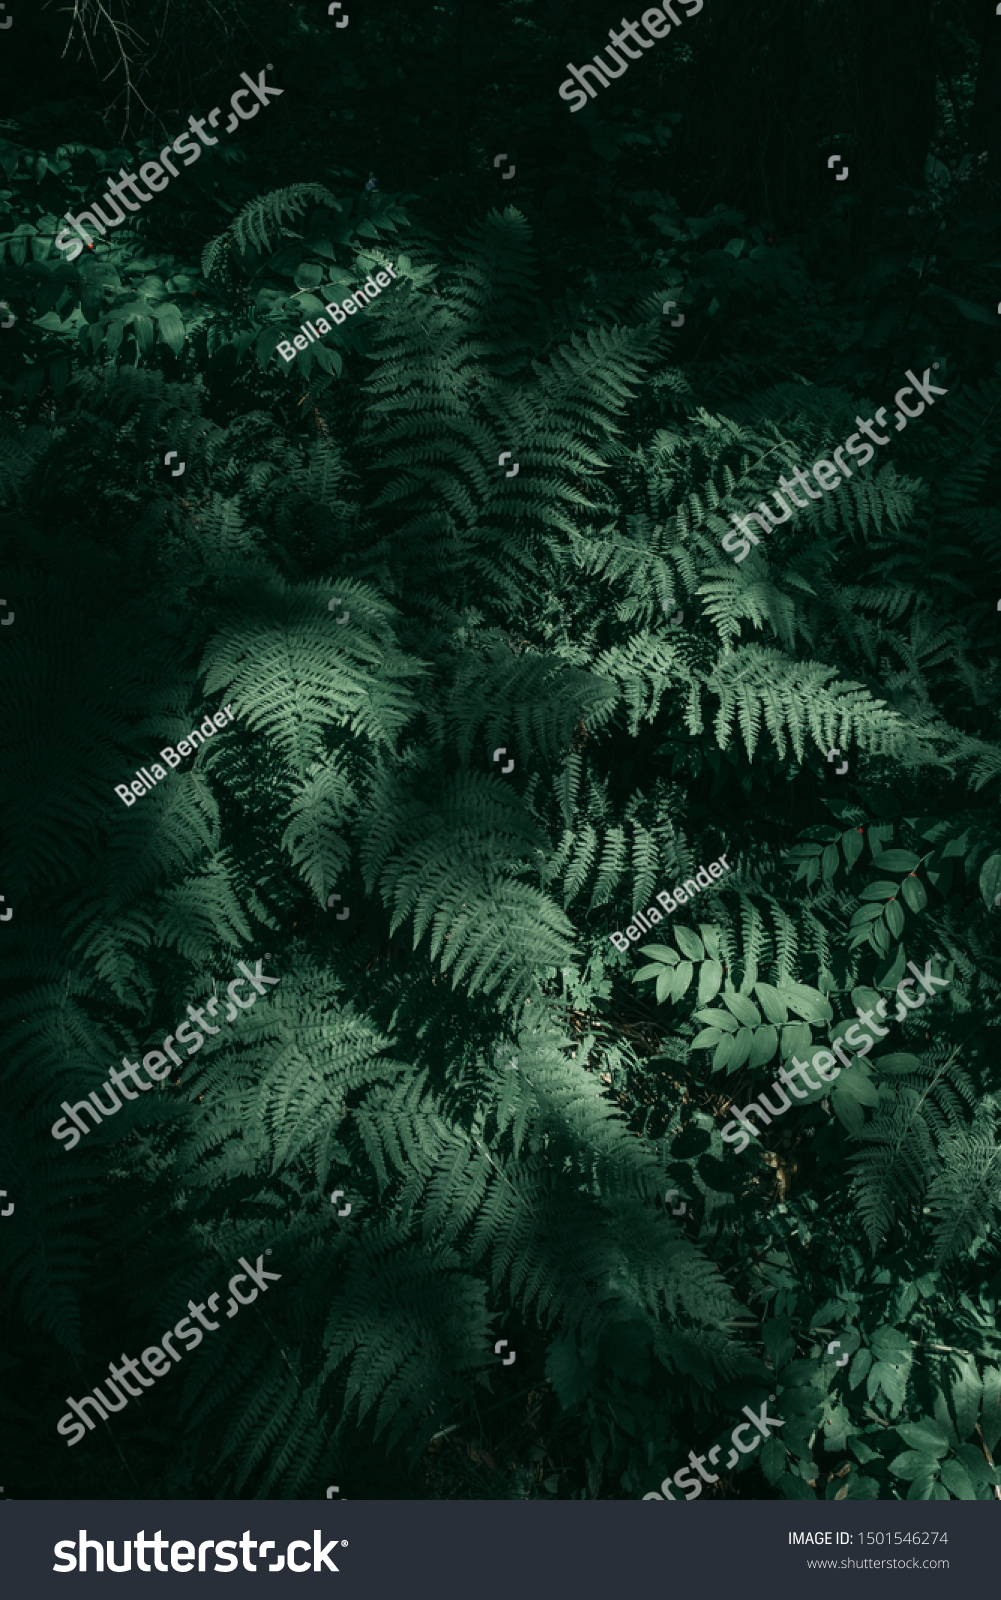 Ferns in the forest. Beautiful ferns, leaves, green foliage. Close up of beautiful growing ferns in the forest. Natural floral fern background in sunlight.  #1501546274